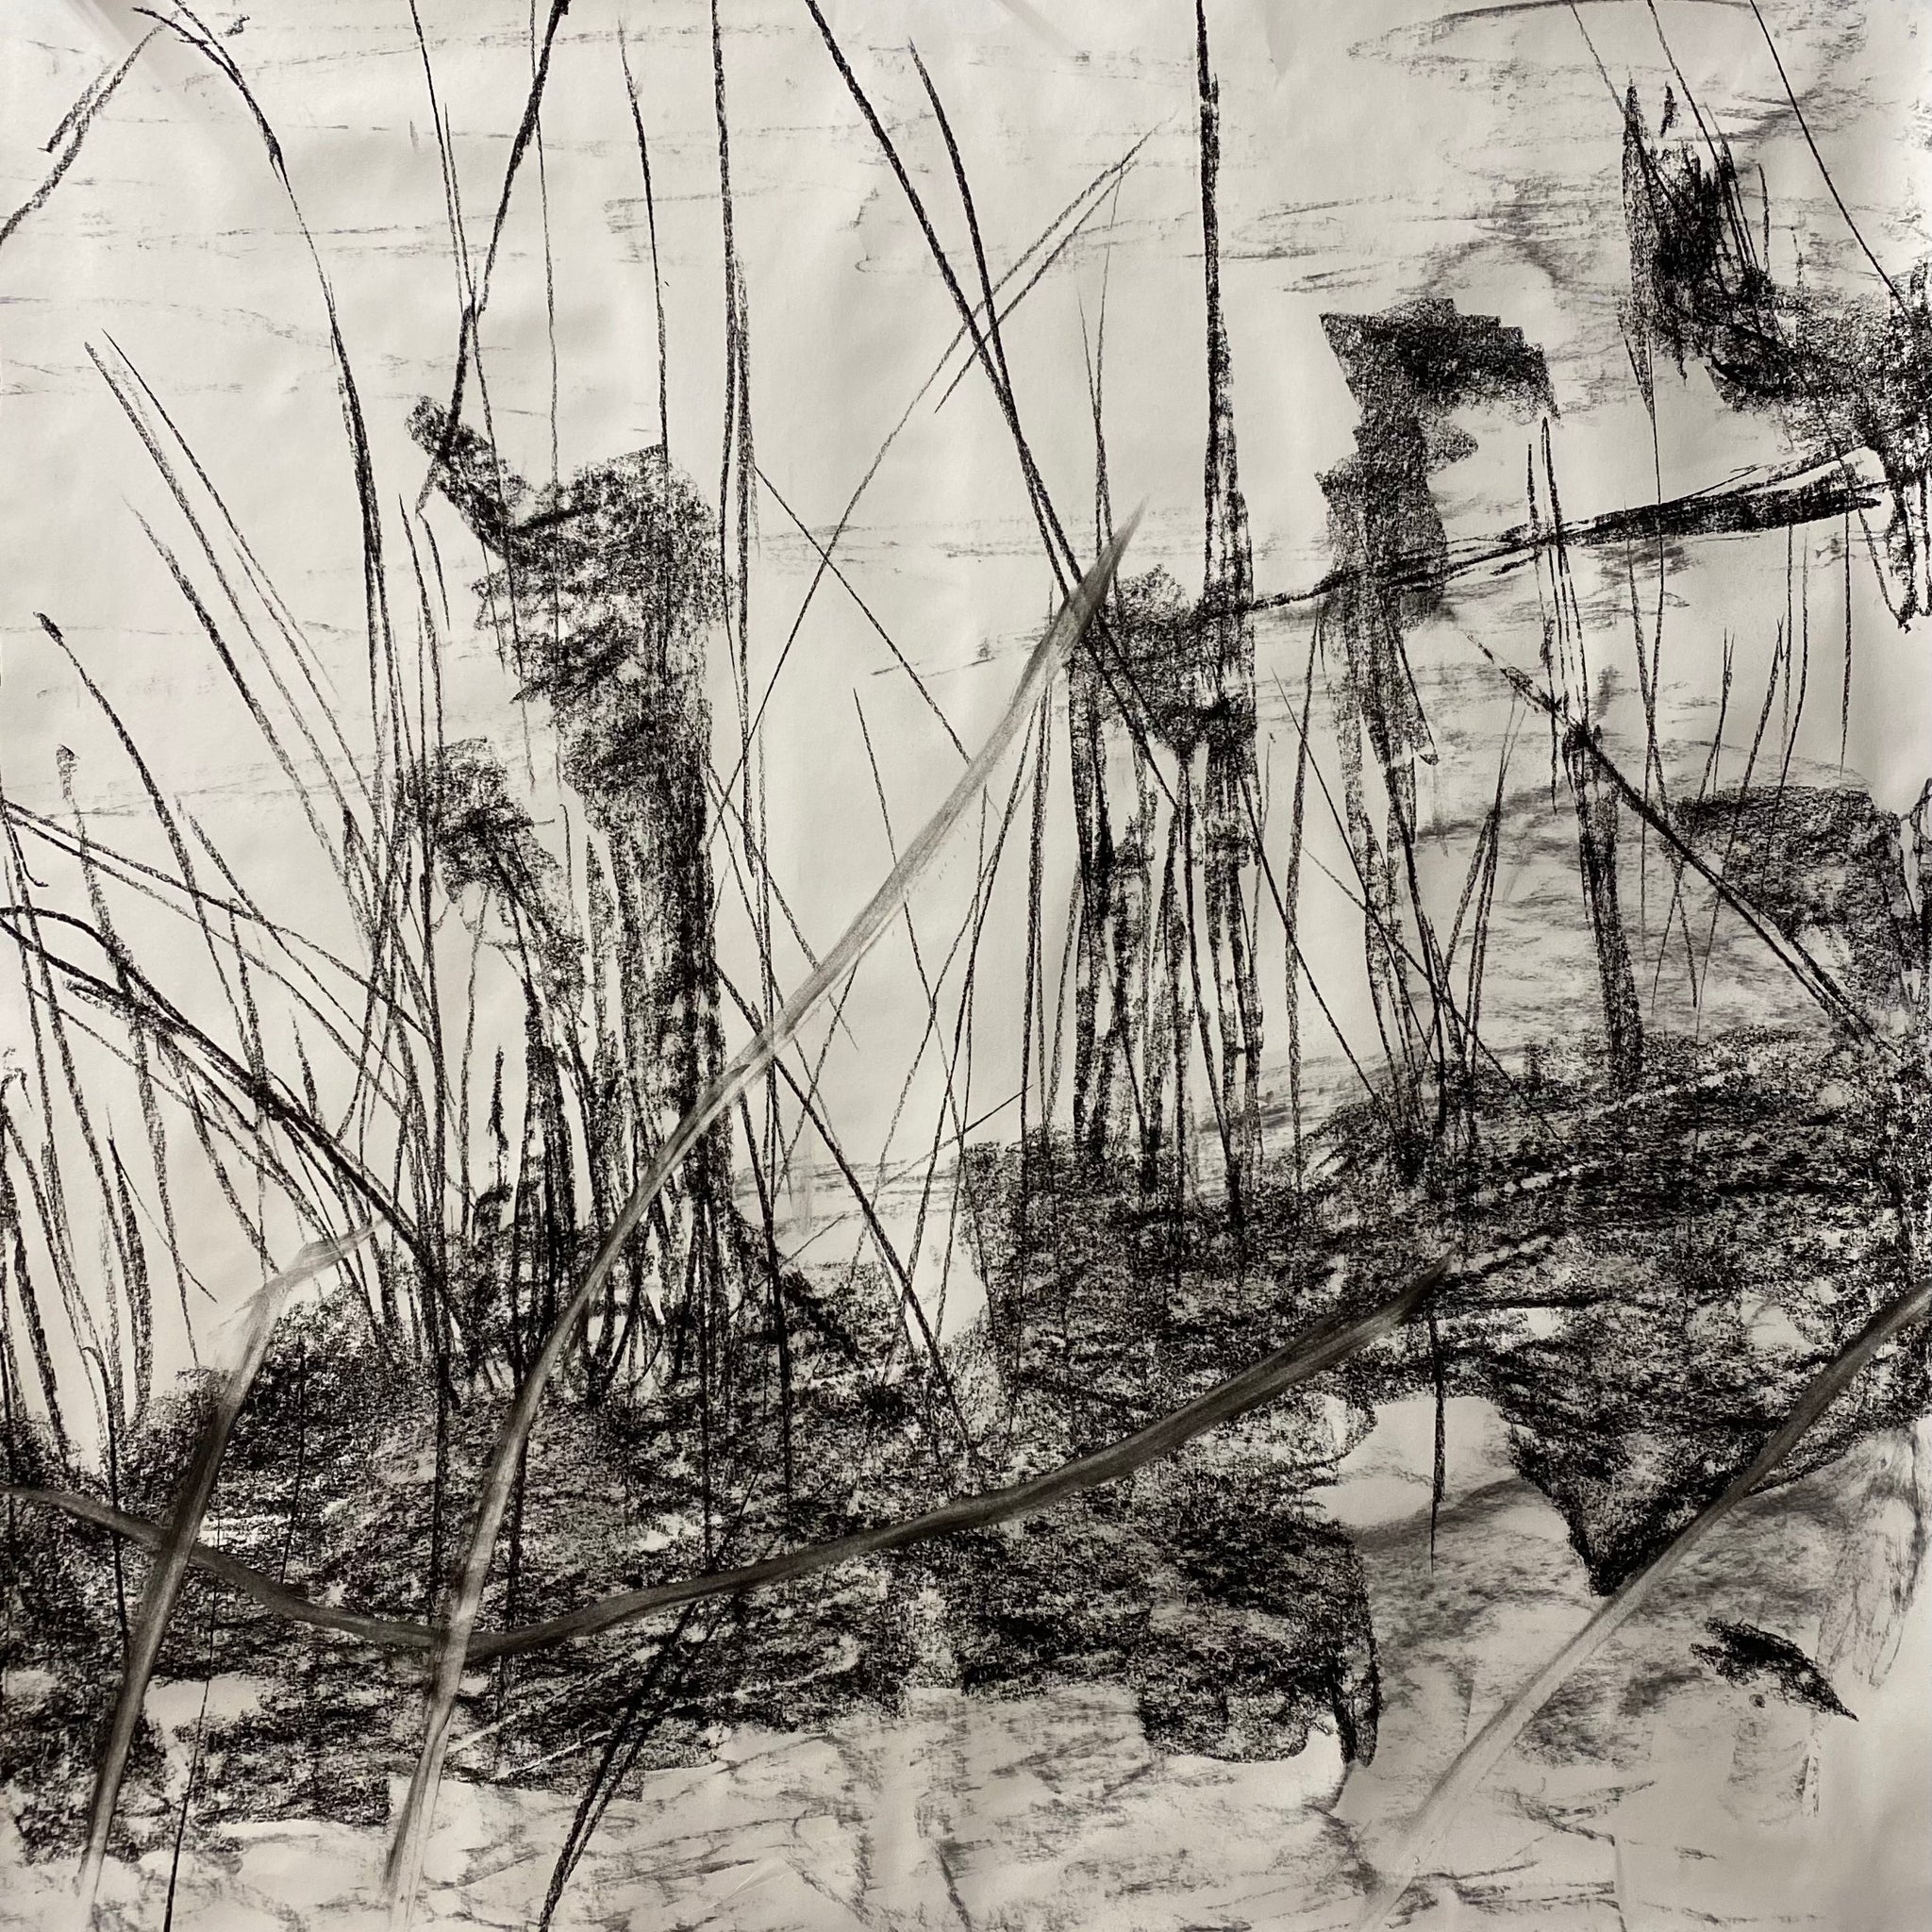 Juanita Bellavance, Fullness of life concept drawing, From the Chestatee River Perspective, 2021, Charcoal on paper, 24 x 24 inches